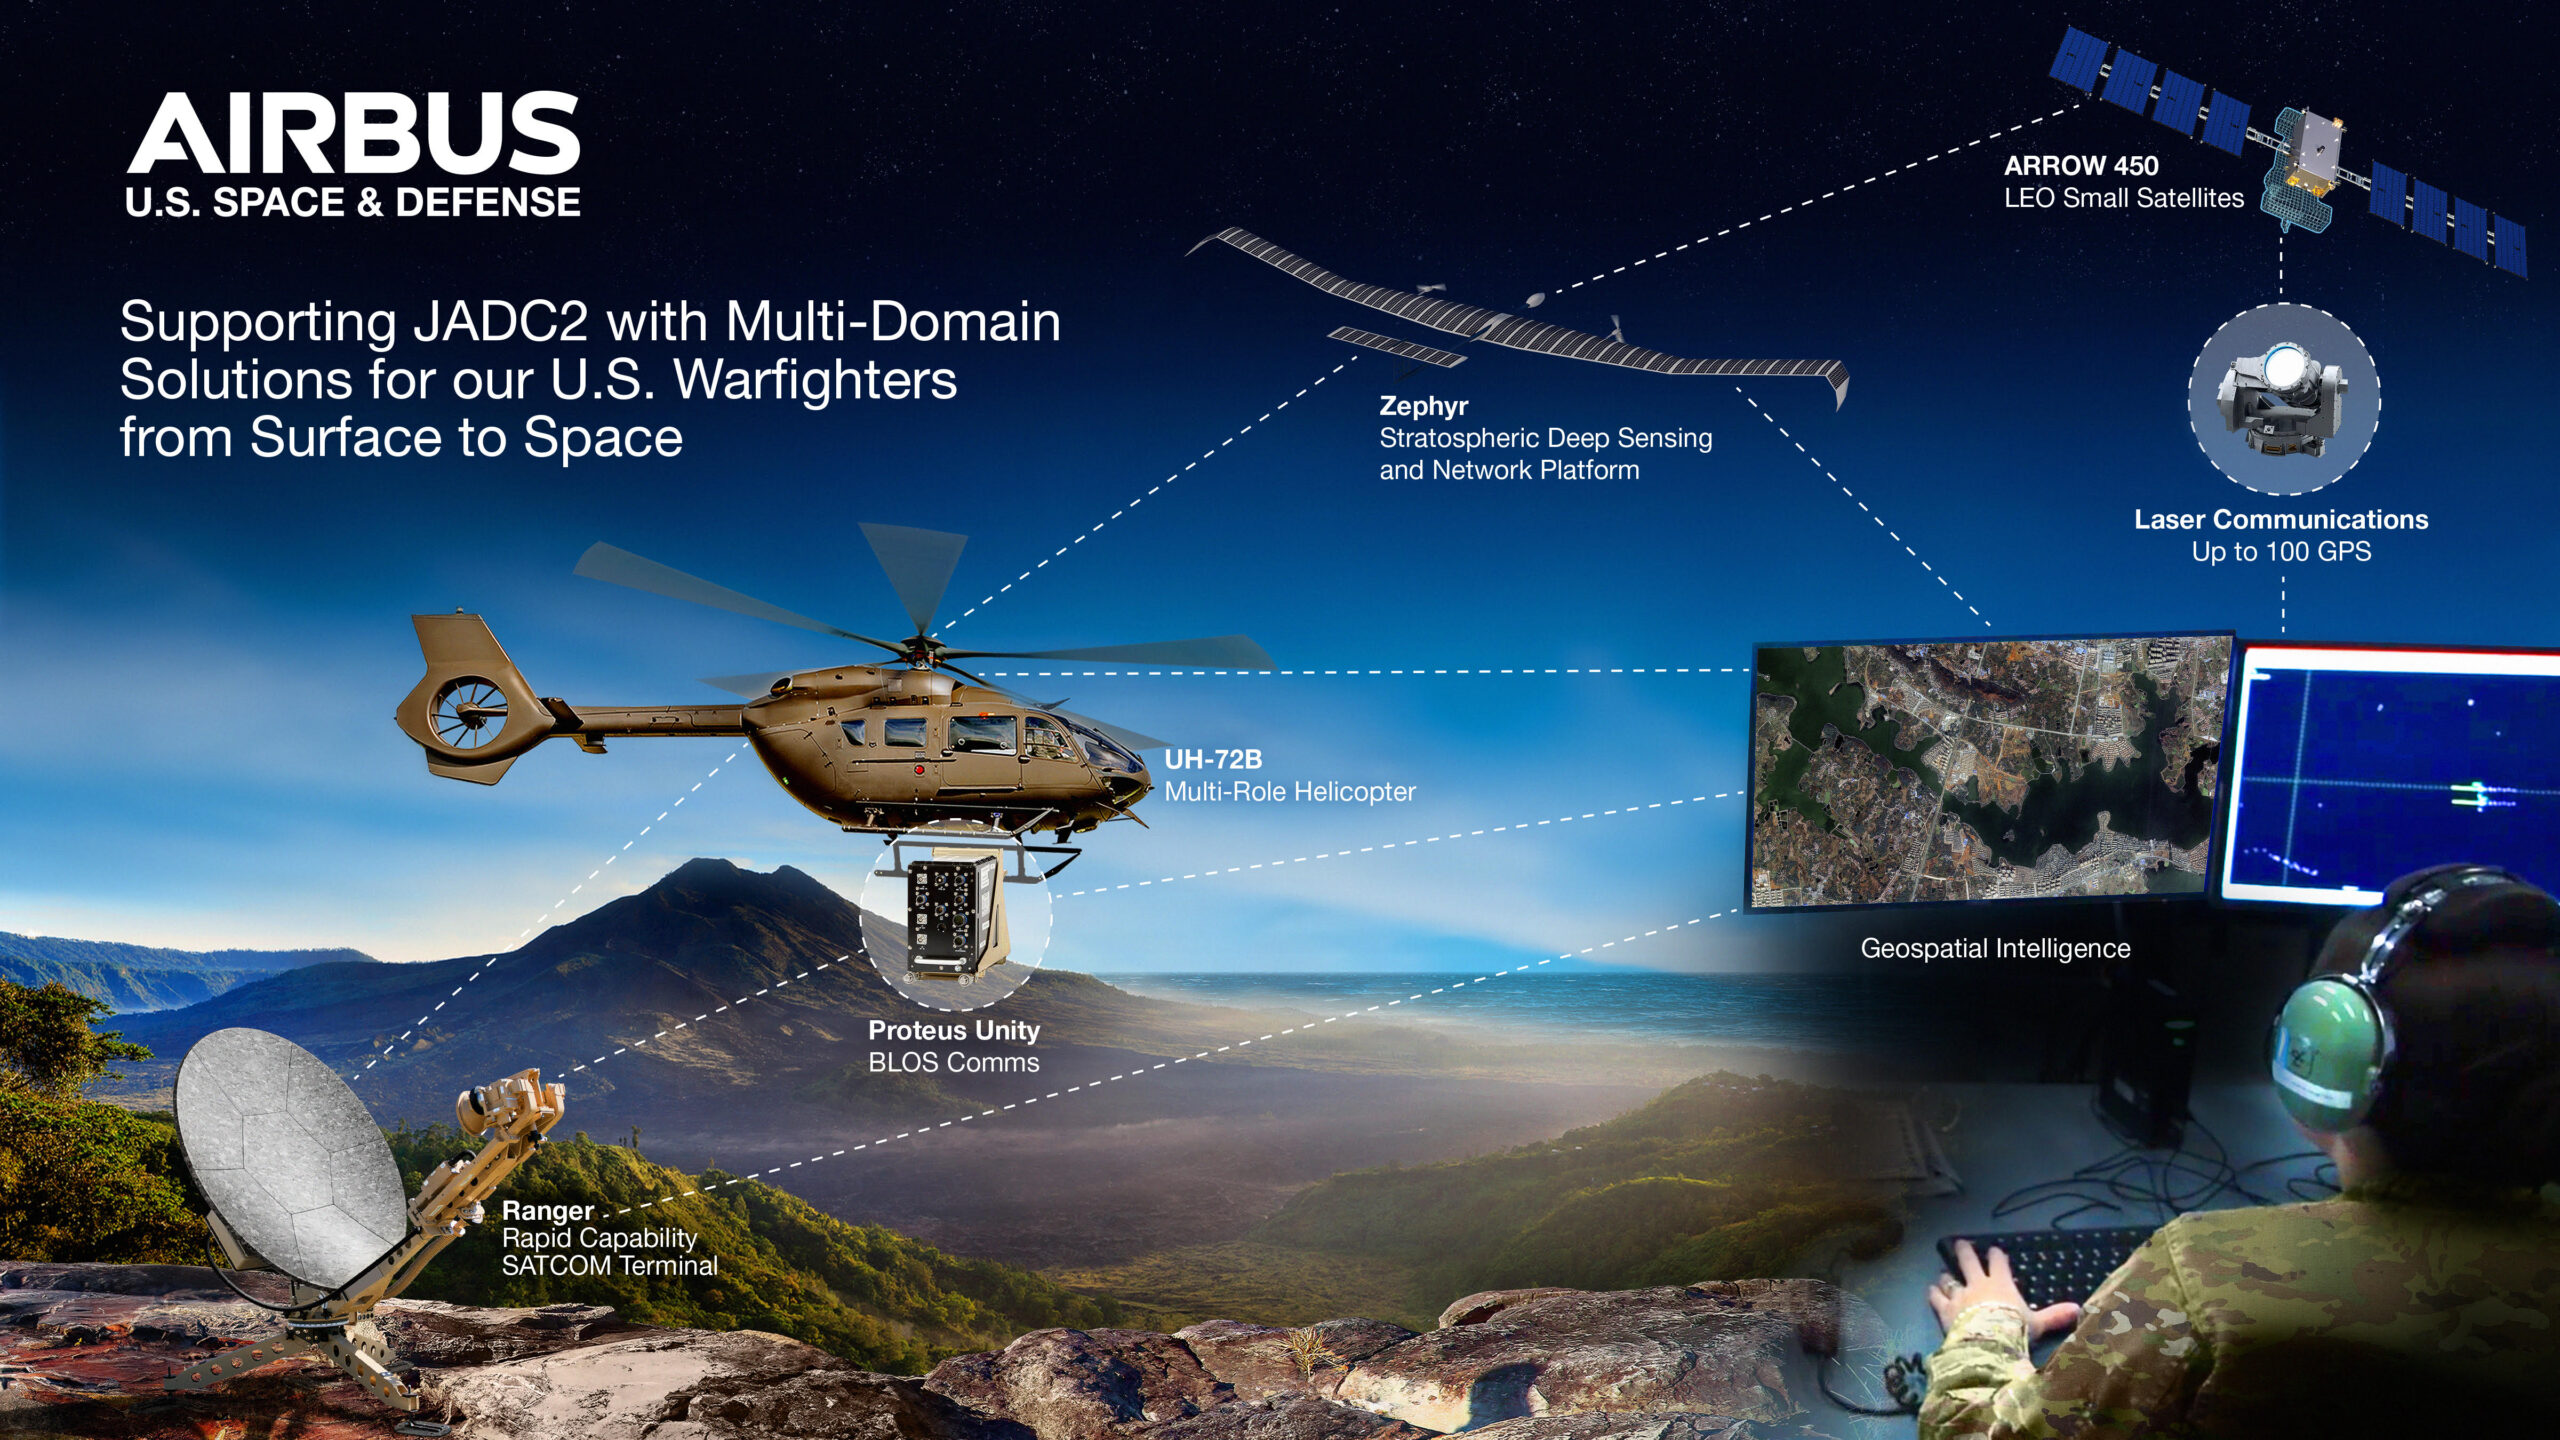 Joint All Domain Command and Control graphic courtesy of Airbus U.S. Space & Defense